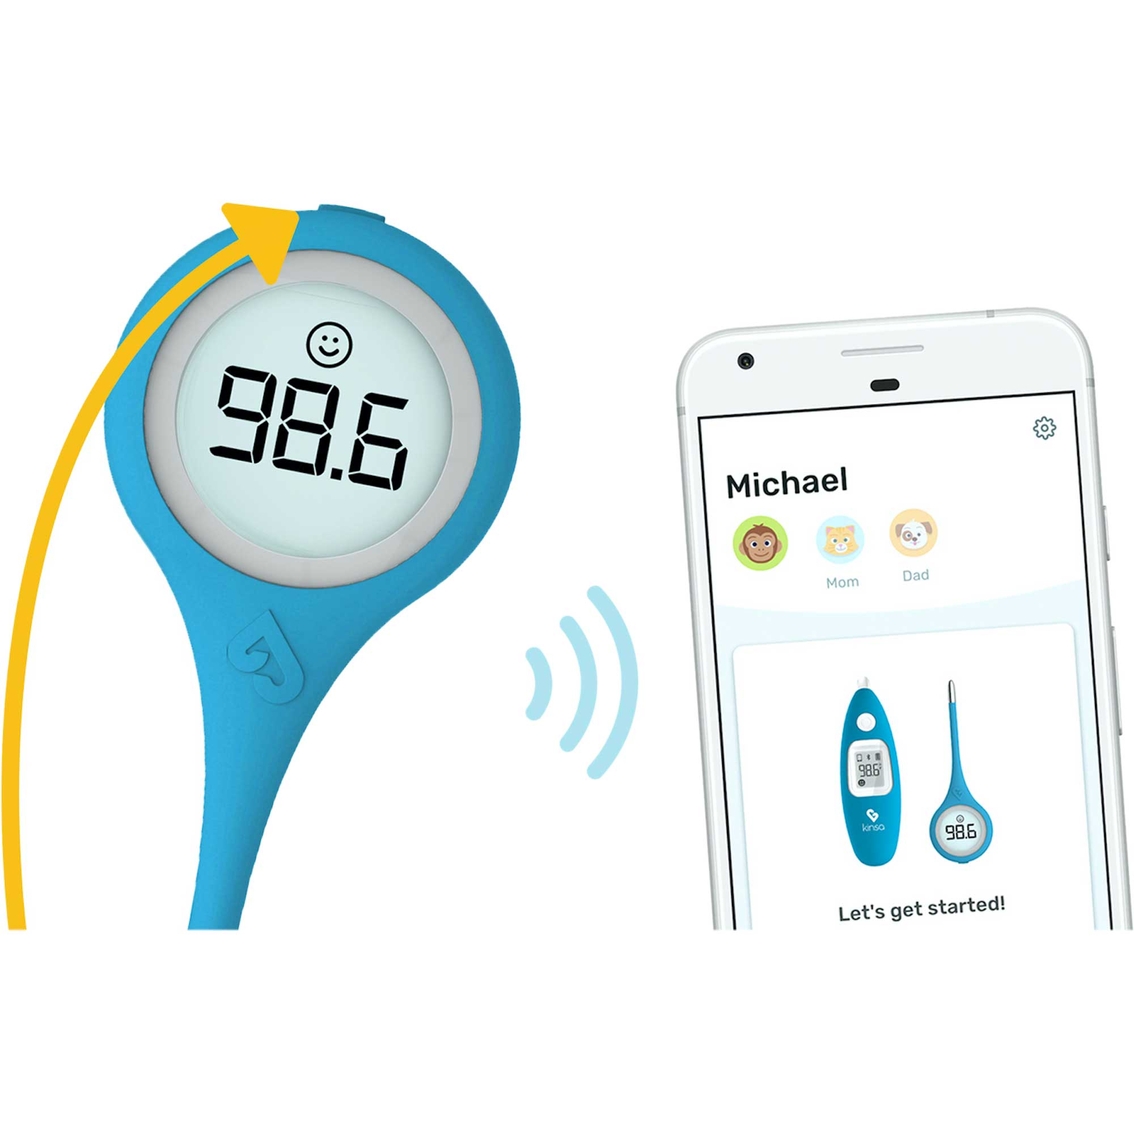 Kinsa QuickCare Smart Digital Thermometer with Smartphone App and Health Guidance - Image 4 of 6